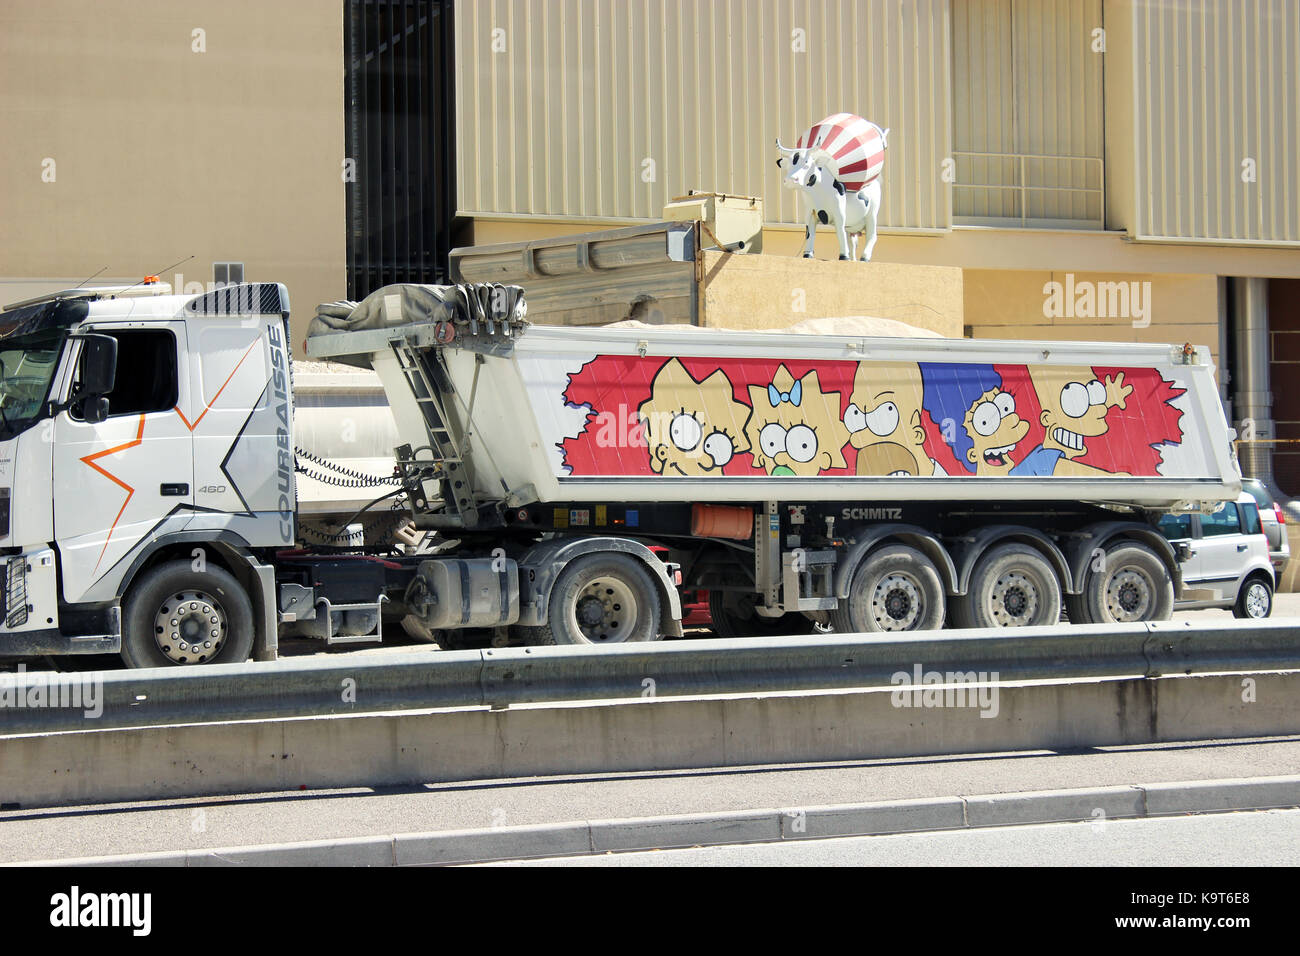 Fontvieille, Monaco - September 18, 2015: Dump Truck Trailer with characters from the Cartoon The Simpsons. South of France Stock Photo